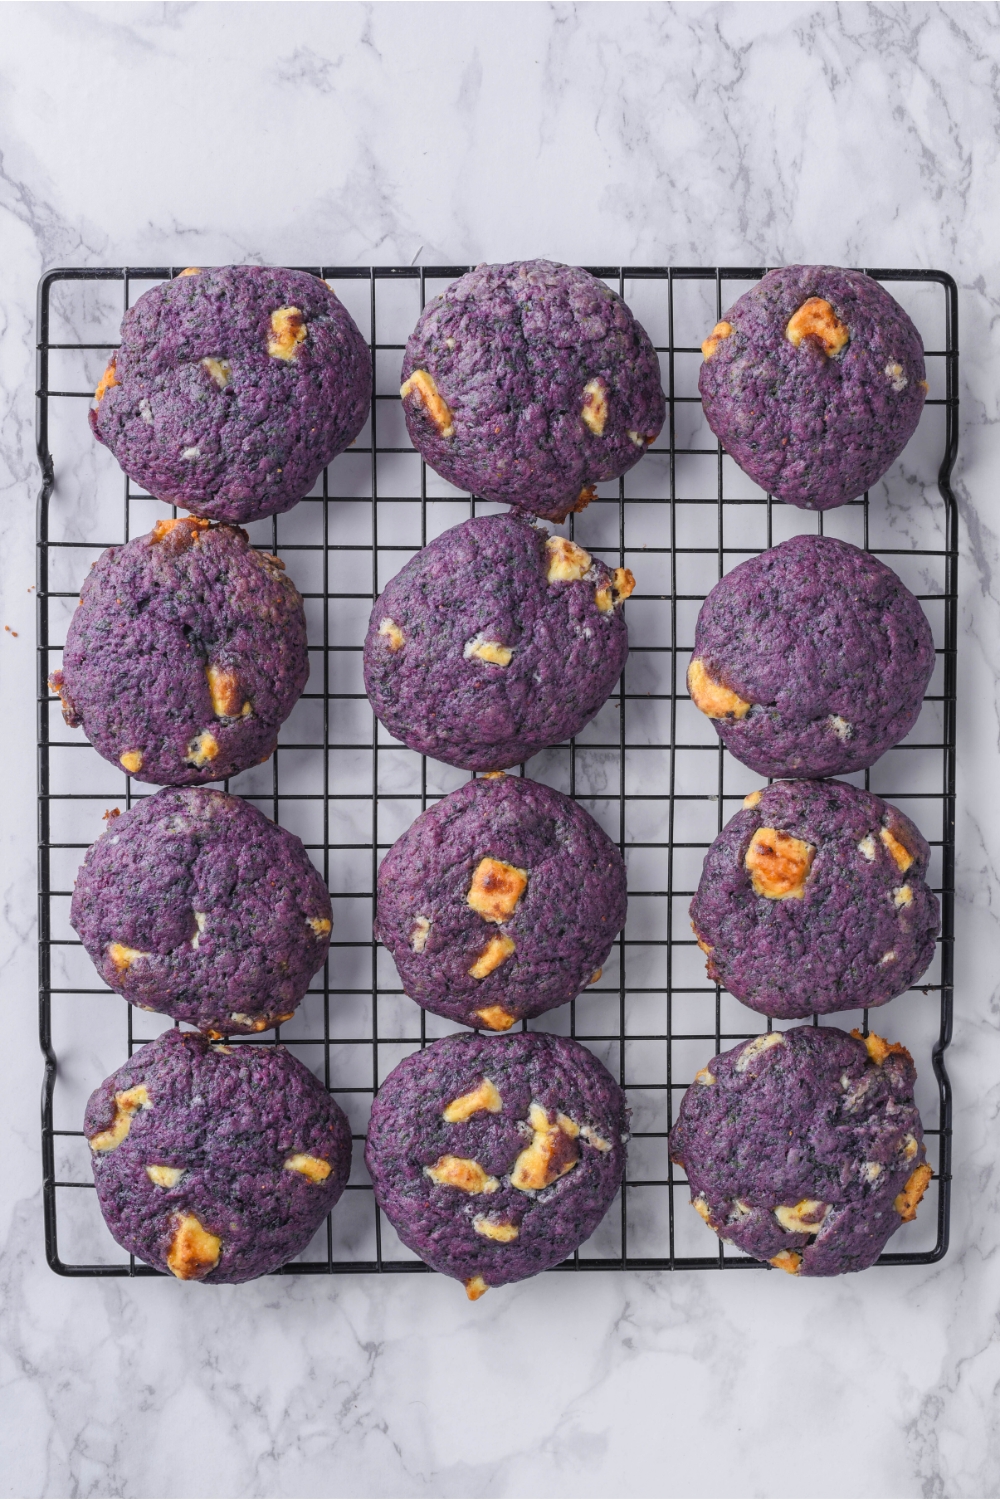 A wire rack with blueberry cookies cooling.